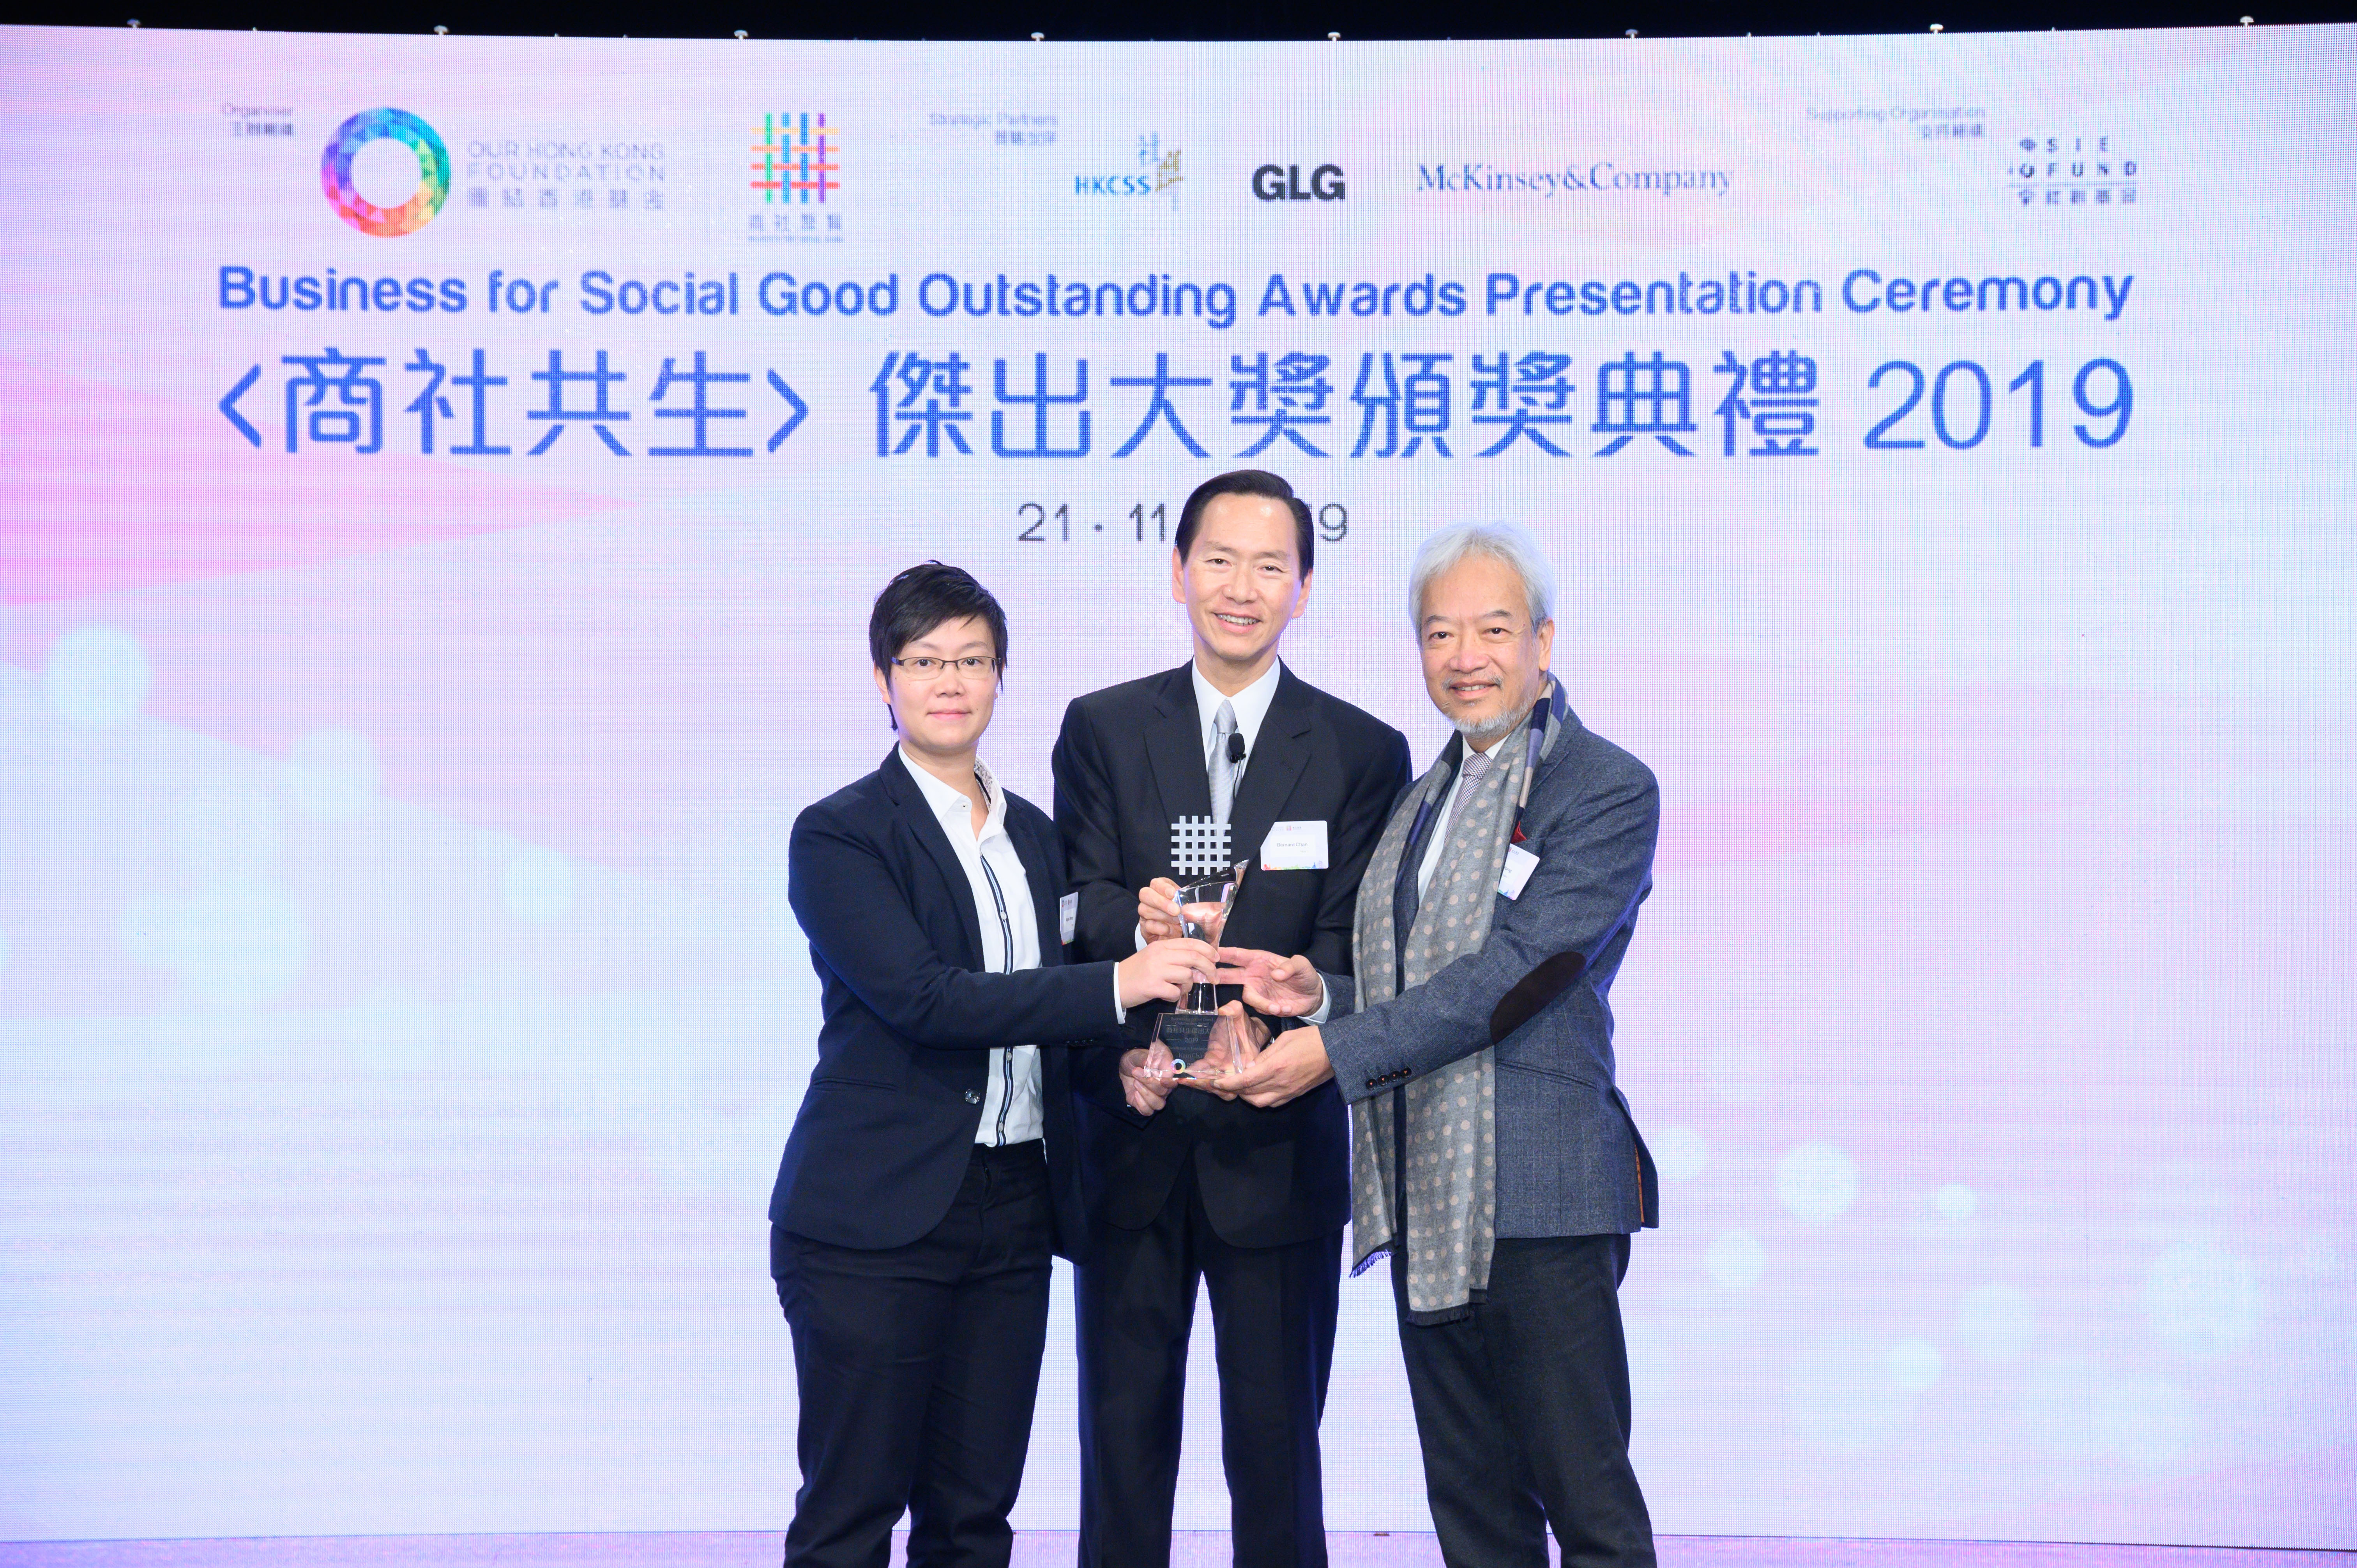 Business for Social Good Outstanding Awards 2019  Three Winning Companies Honoured for Their  Outstanding Models of Creating Shared Value